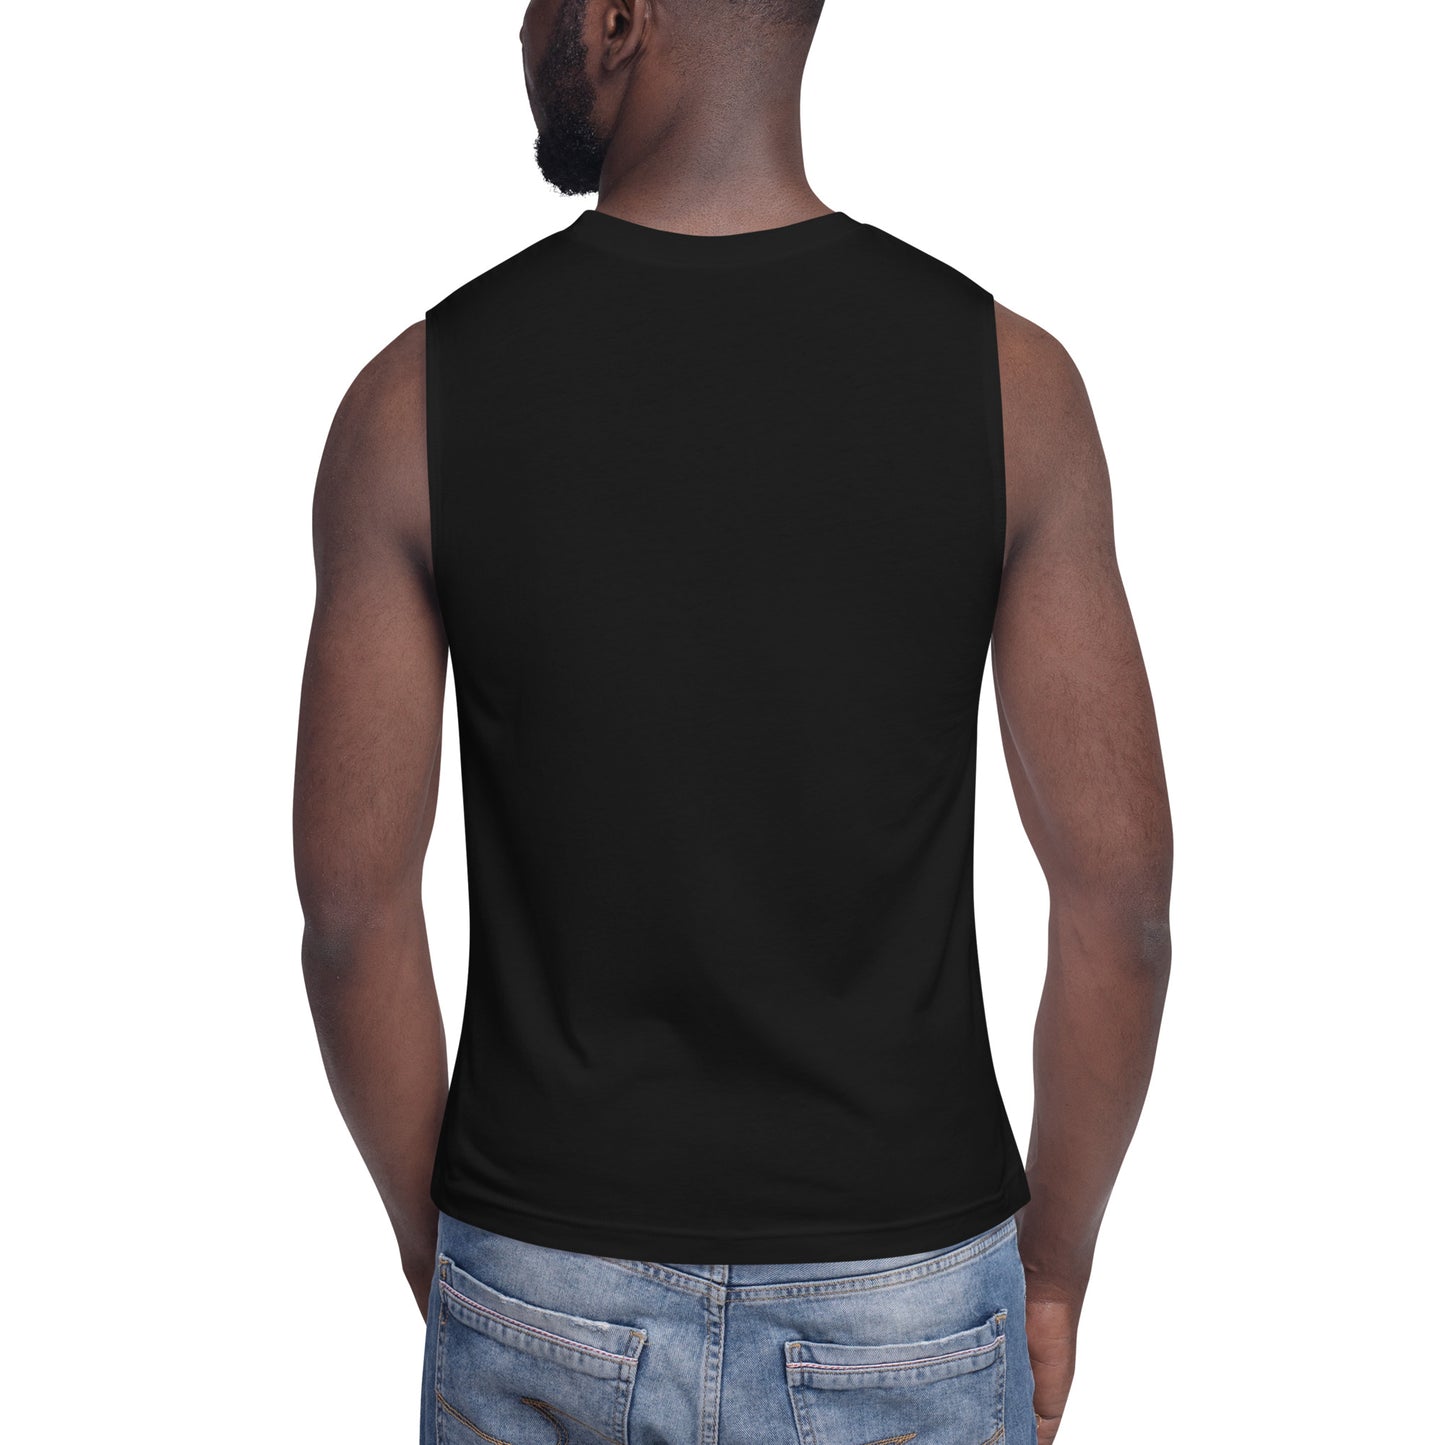 AFRICA ON THE RISE Muscle Shirt (Black)